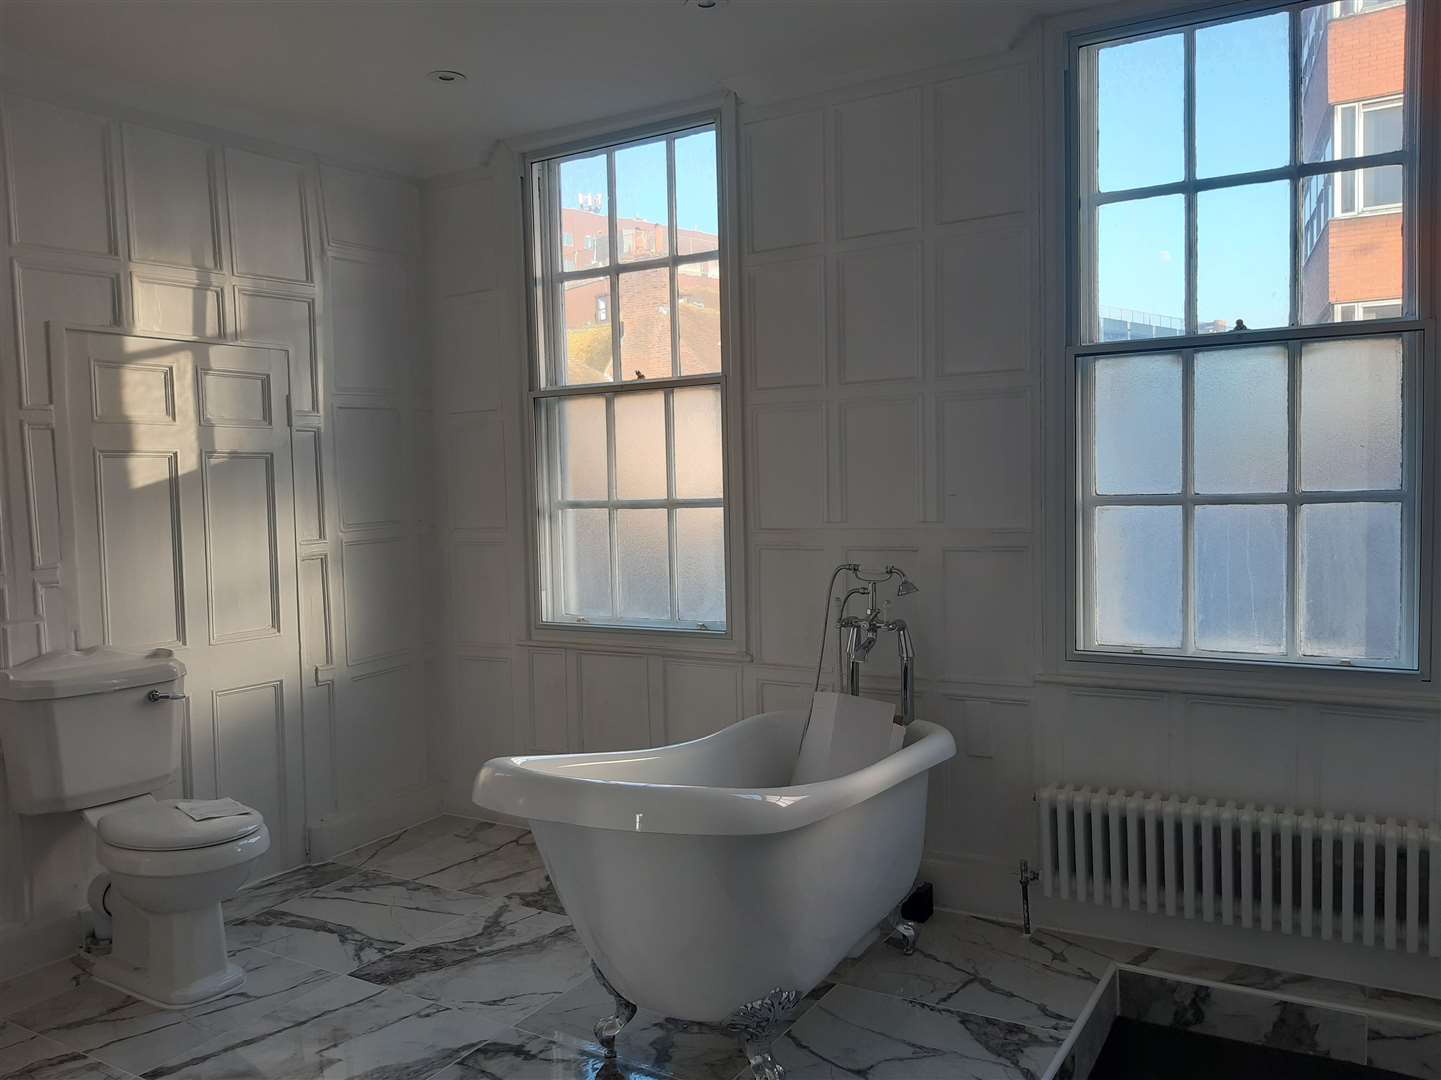 A bathroom in the newly refurbished Stone Court House